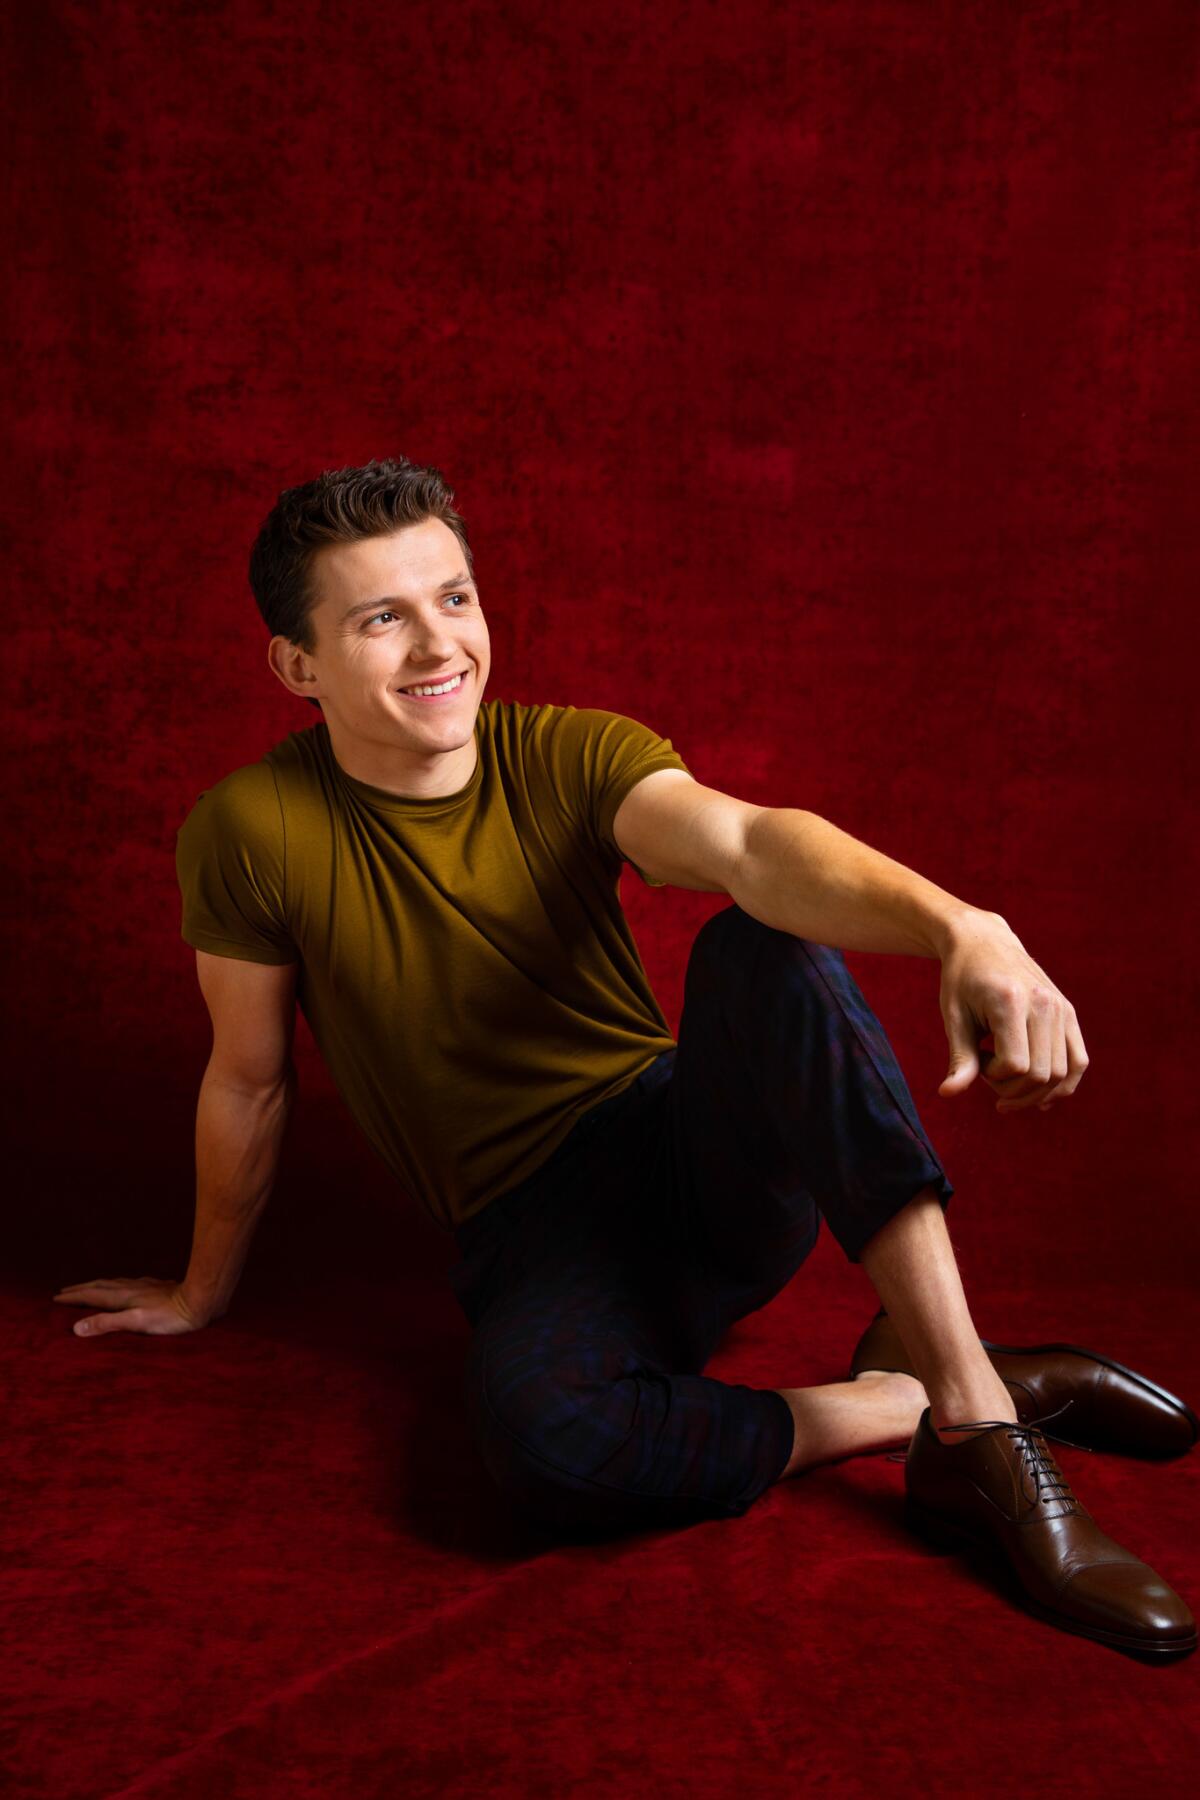 Tom Holland photographed during a day of press for "Spider-Man: Far From Home" at the Montage in Beverly Hills on May 9, 2019. "Far From Home" follows Marvel's "Avengers: Endgame" and is the final Marvel release of 2019.